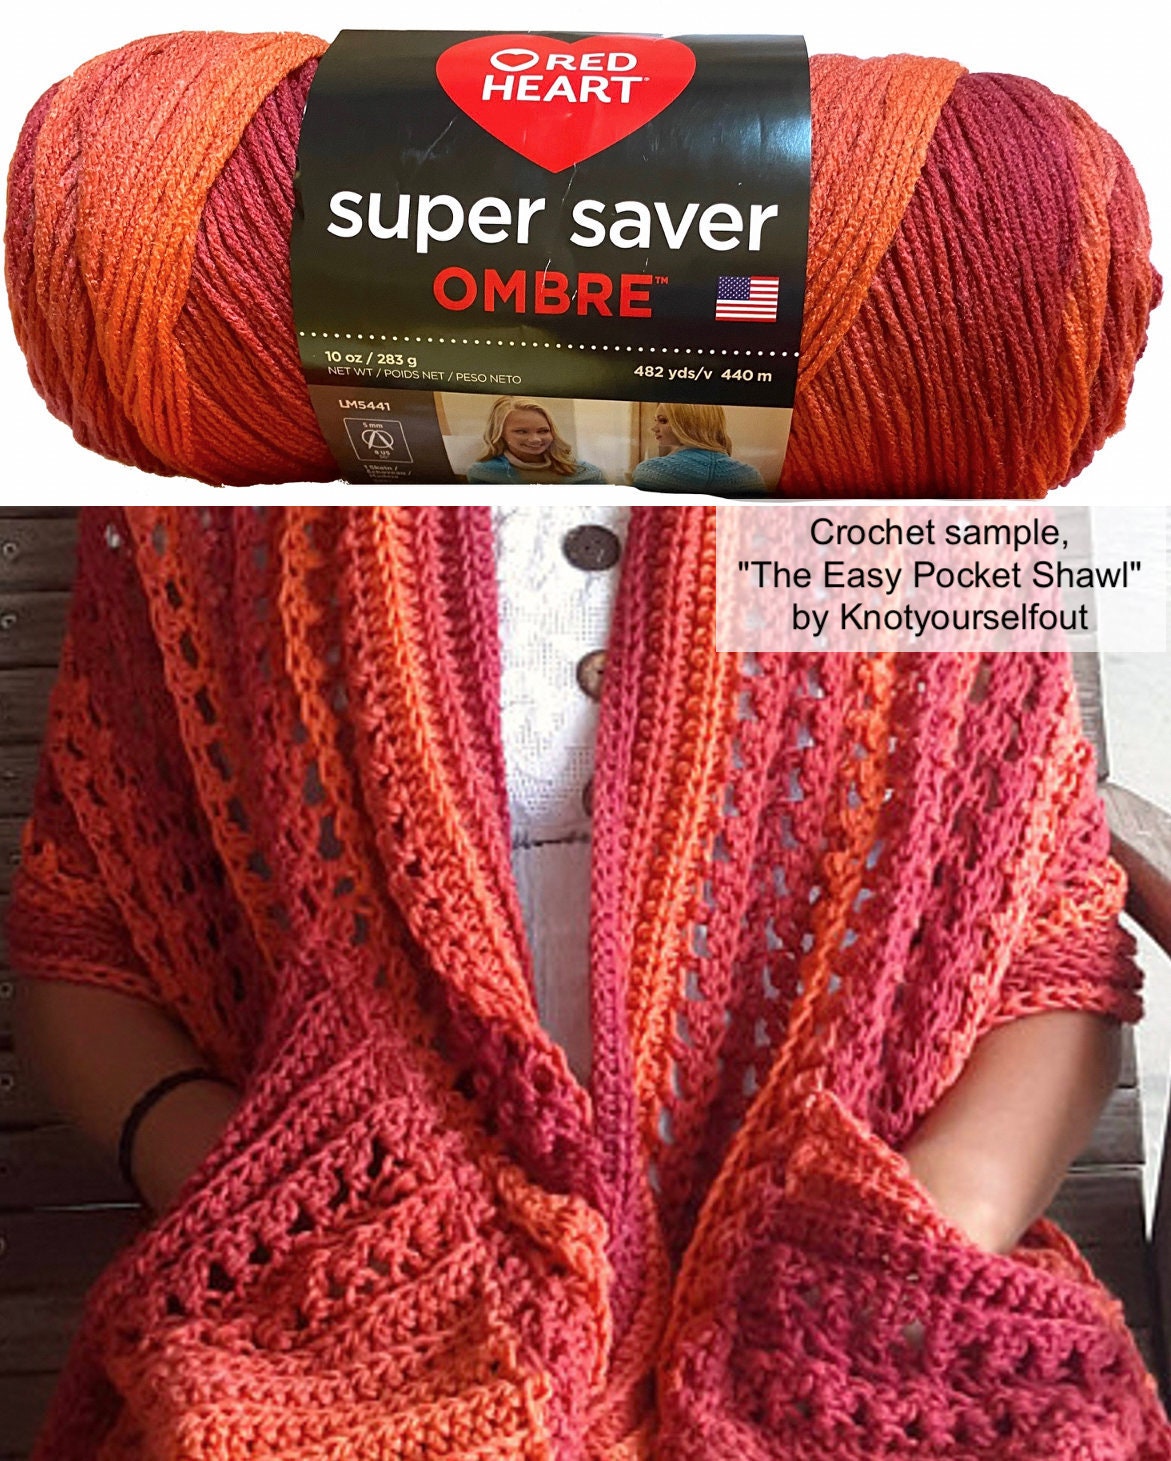 Hot Sauce Yarn New Color Red Heart Super Saver Ombre Yarn, Variegated,  Gradient, Color Blend, Acrylic Worsted 4 Weight, Low & Fast Ship 